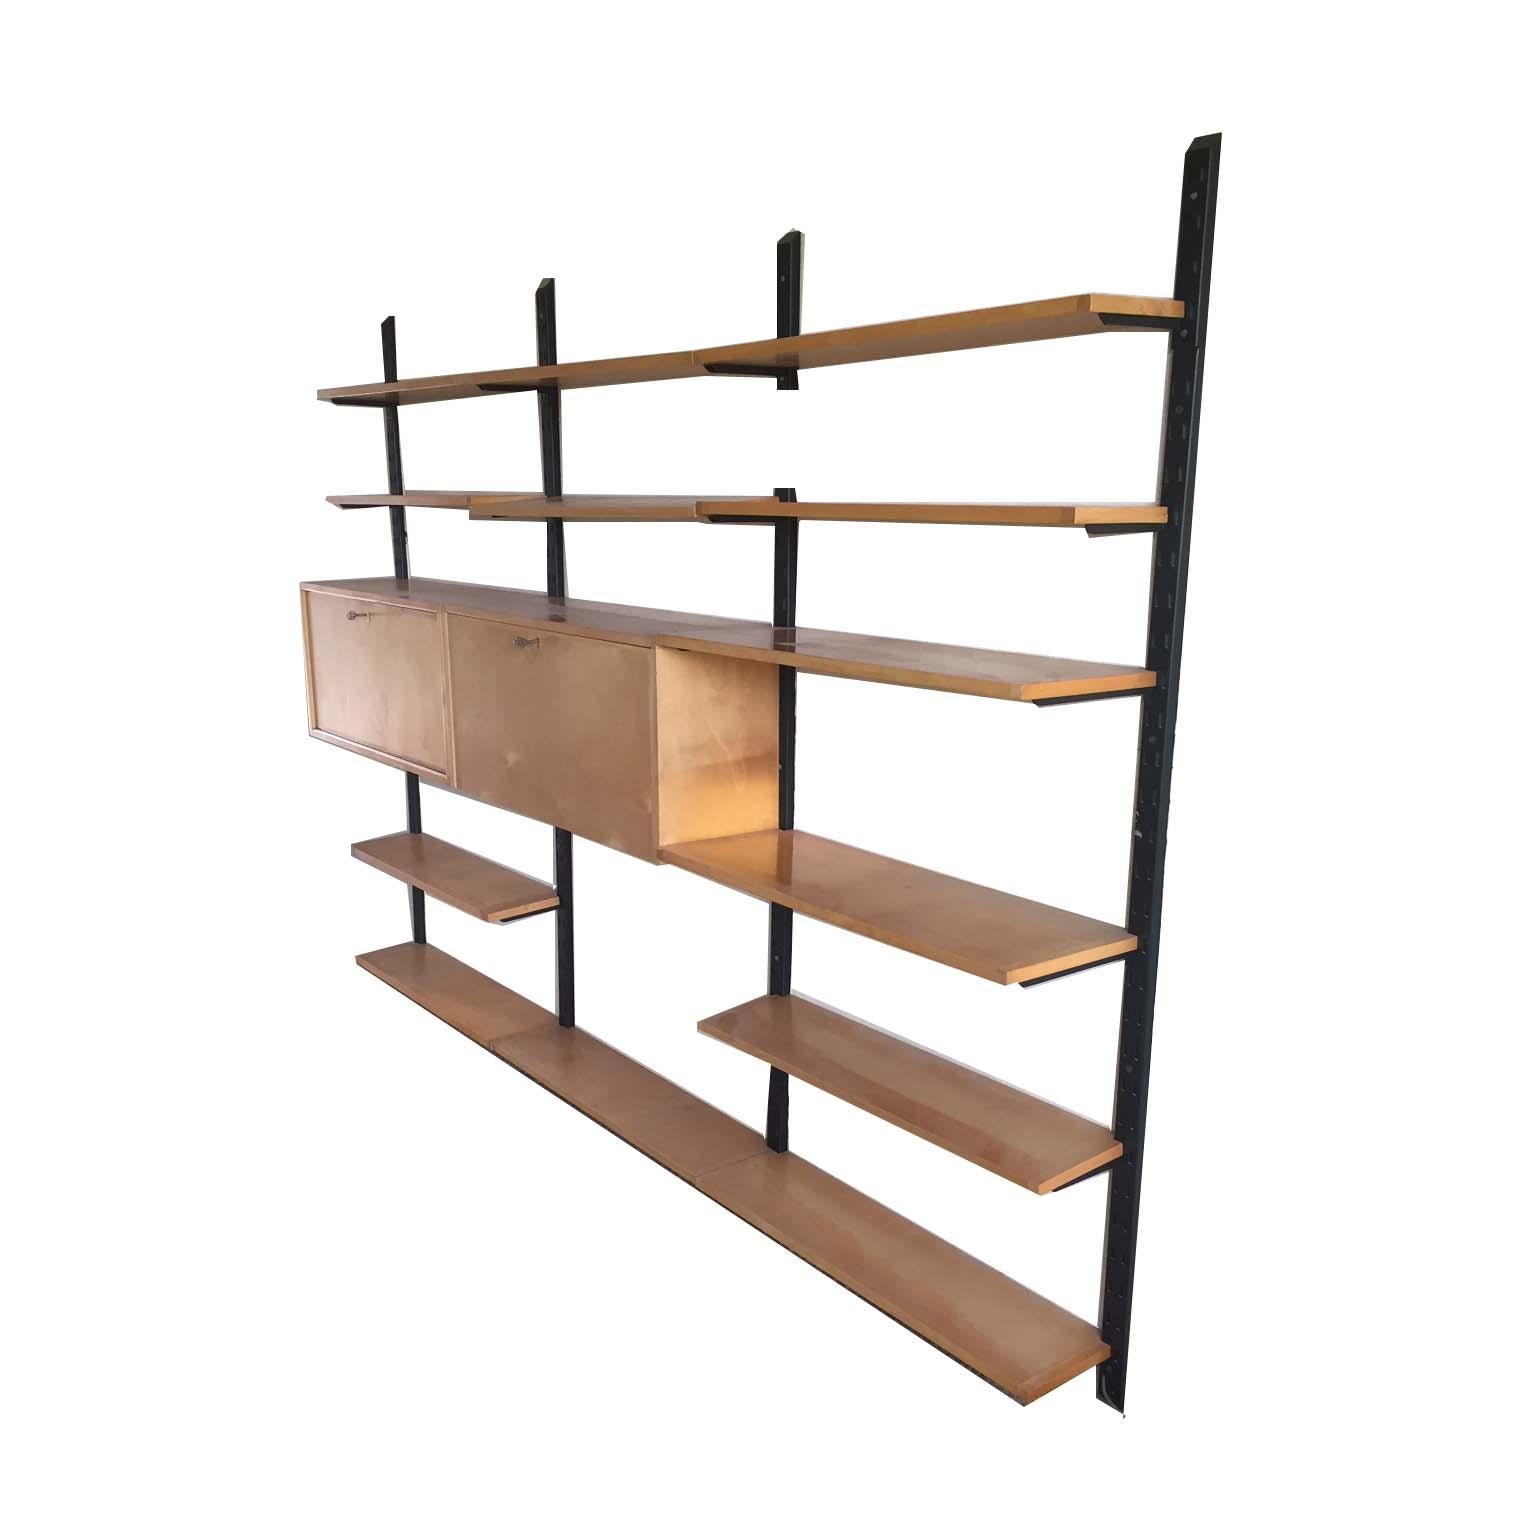 Cees Braakman for Pastoe style “Birch Series” shelving system, Dutch, 1950s.

This unique item, from the 1950s, was made on request by former owners to match their Birch series interior. This because Pastoe and Cees Braakman never made a Birch